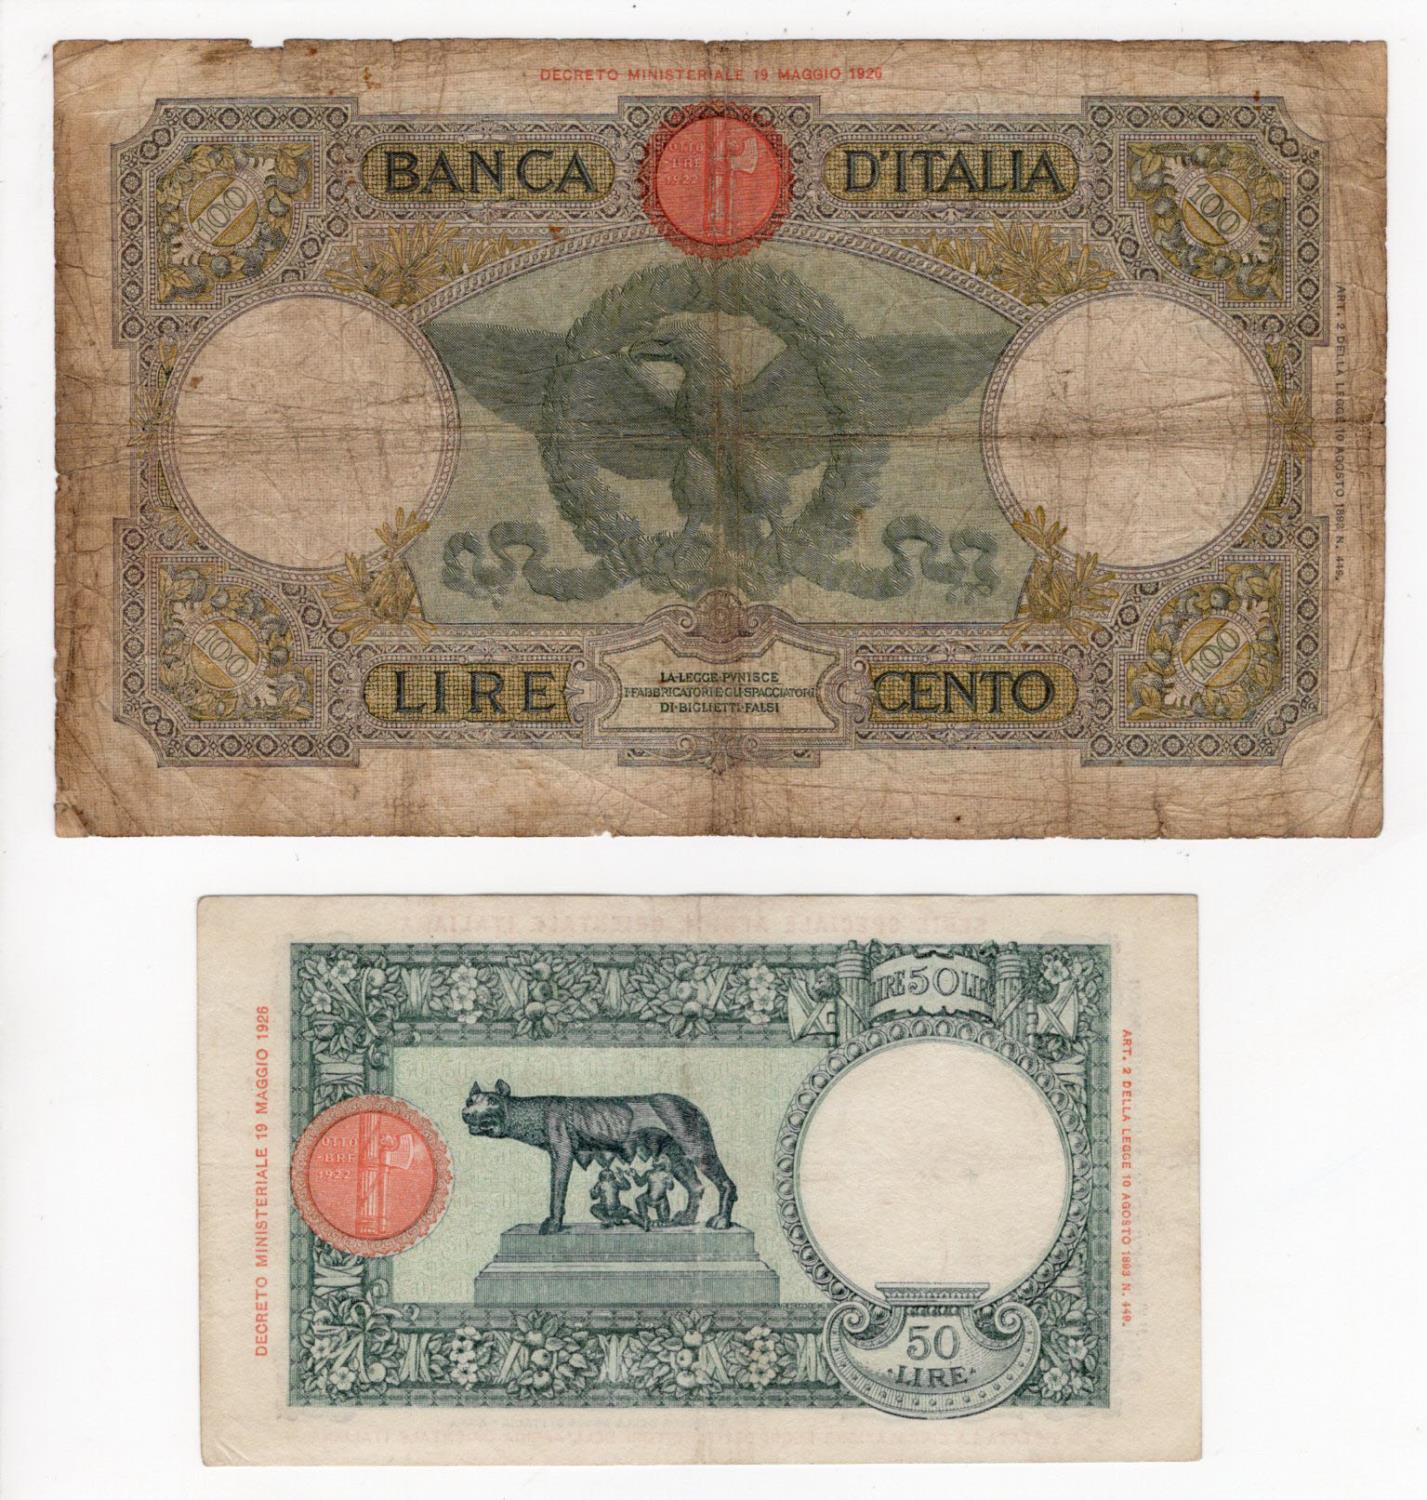 Italian East Africa (2), 100 Lire dated 14th June 1938 - 12th September 1938, signed Azzolini & - Image 2 of 2